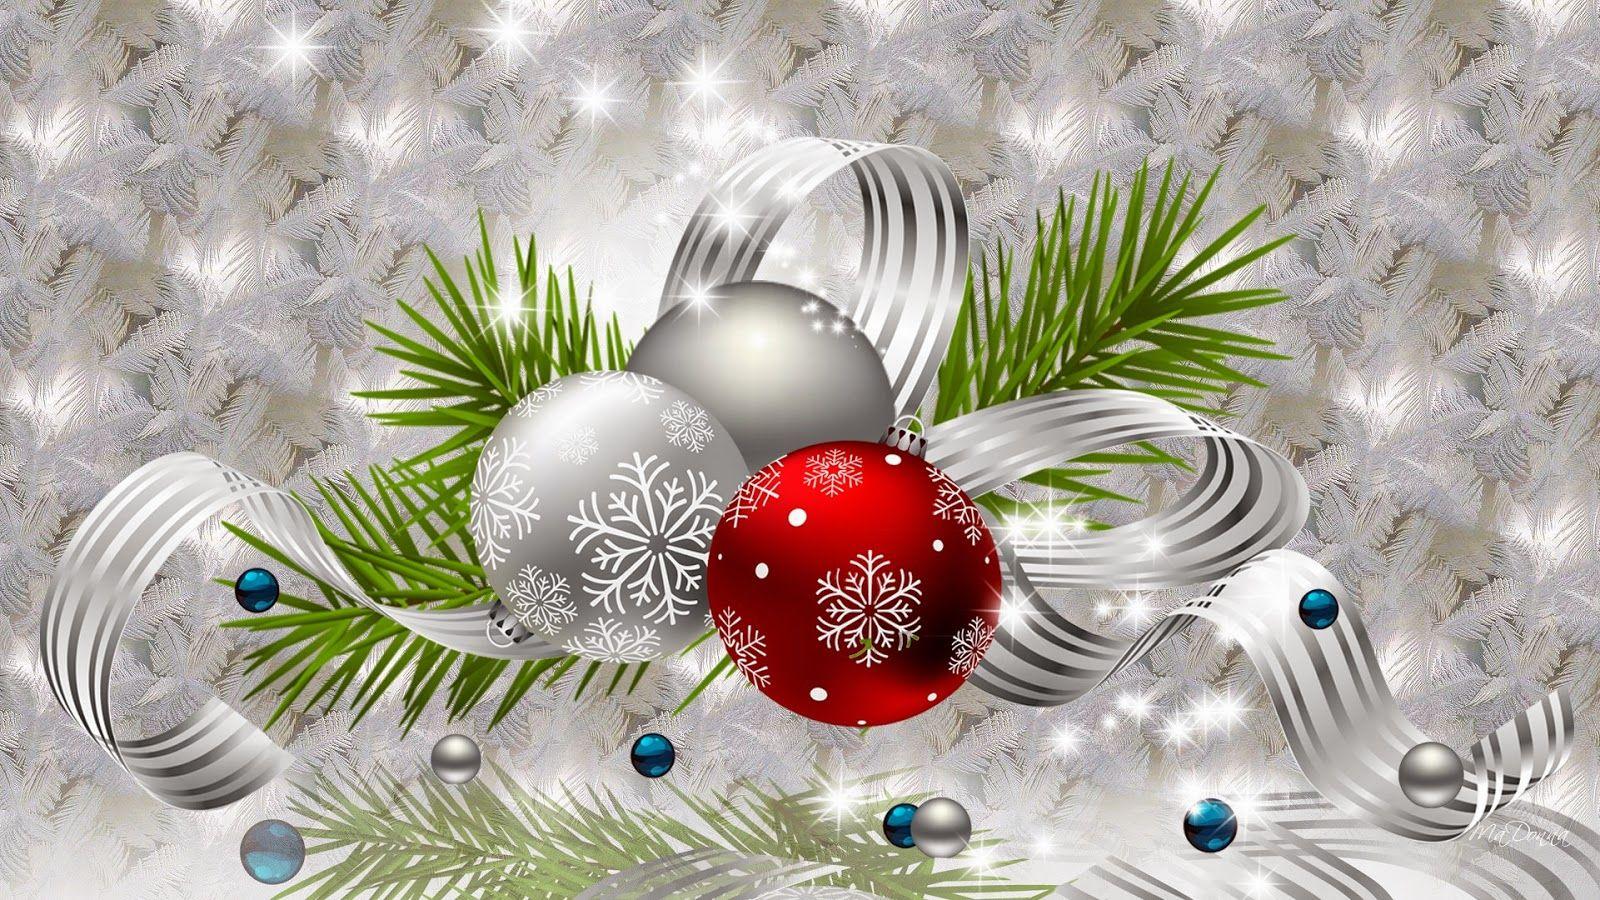 Silver Bells Wallpaper Background. PIXHOME: Christmas tree